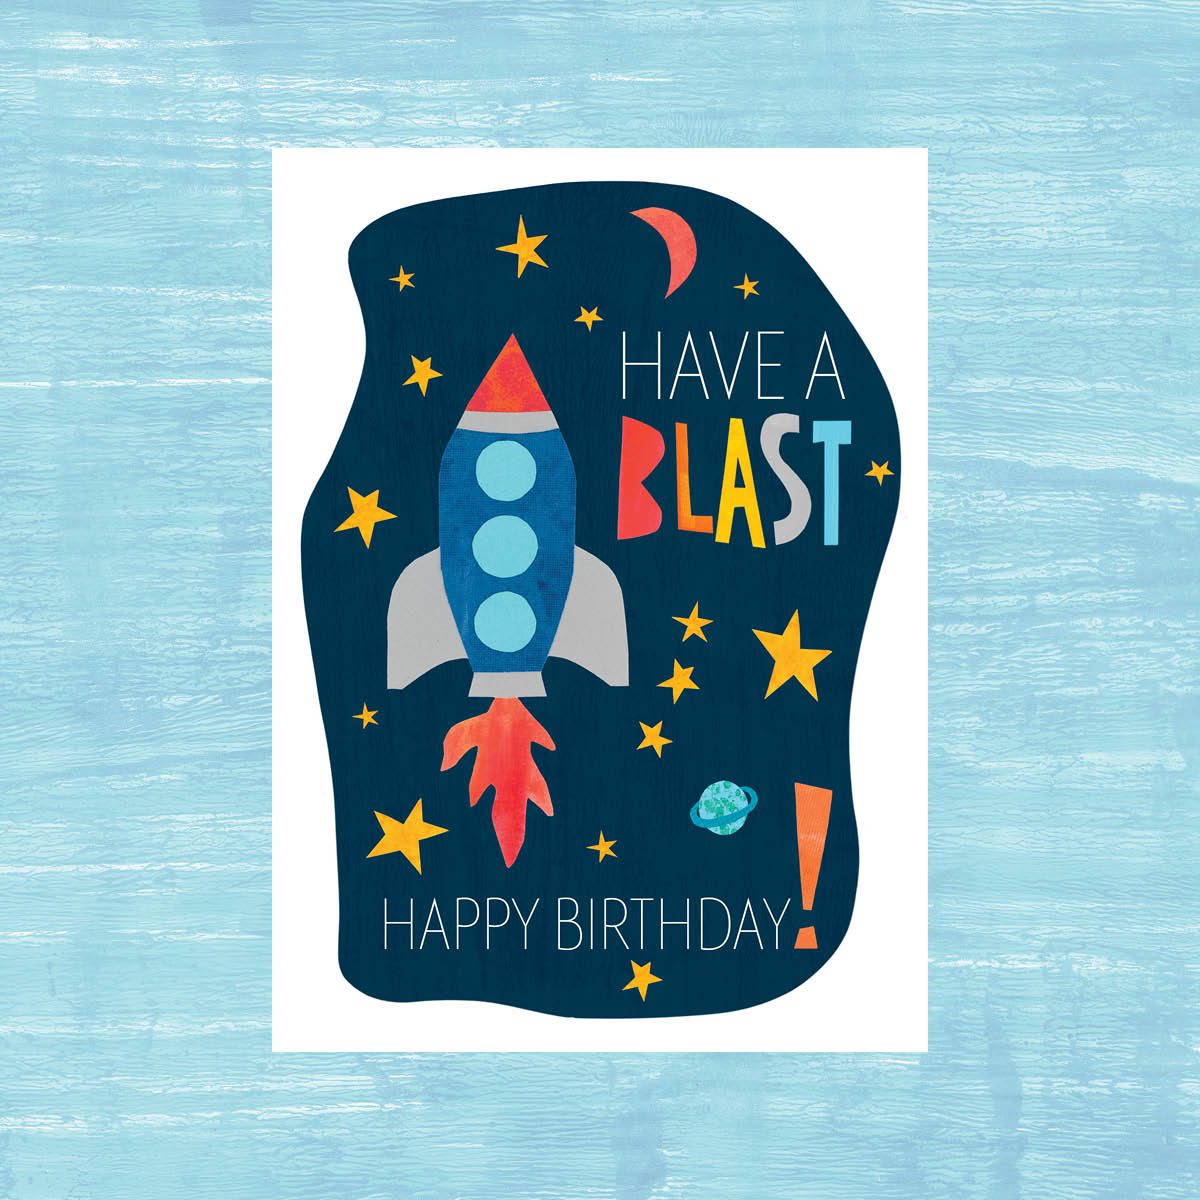 Have a Blast - Greeting Card